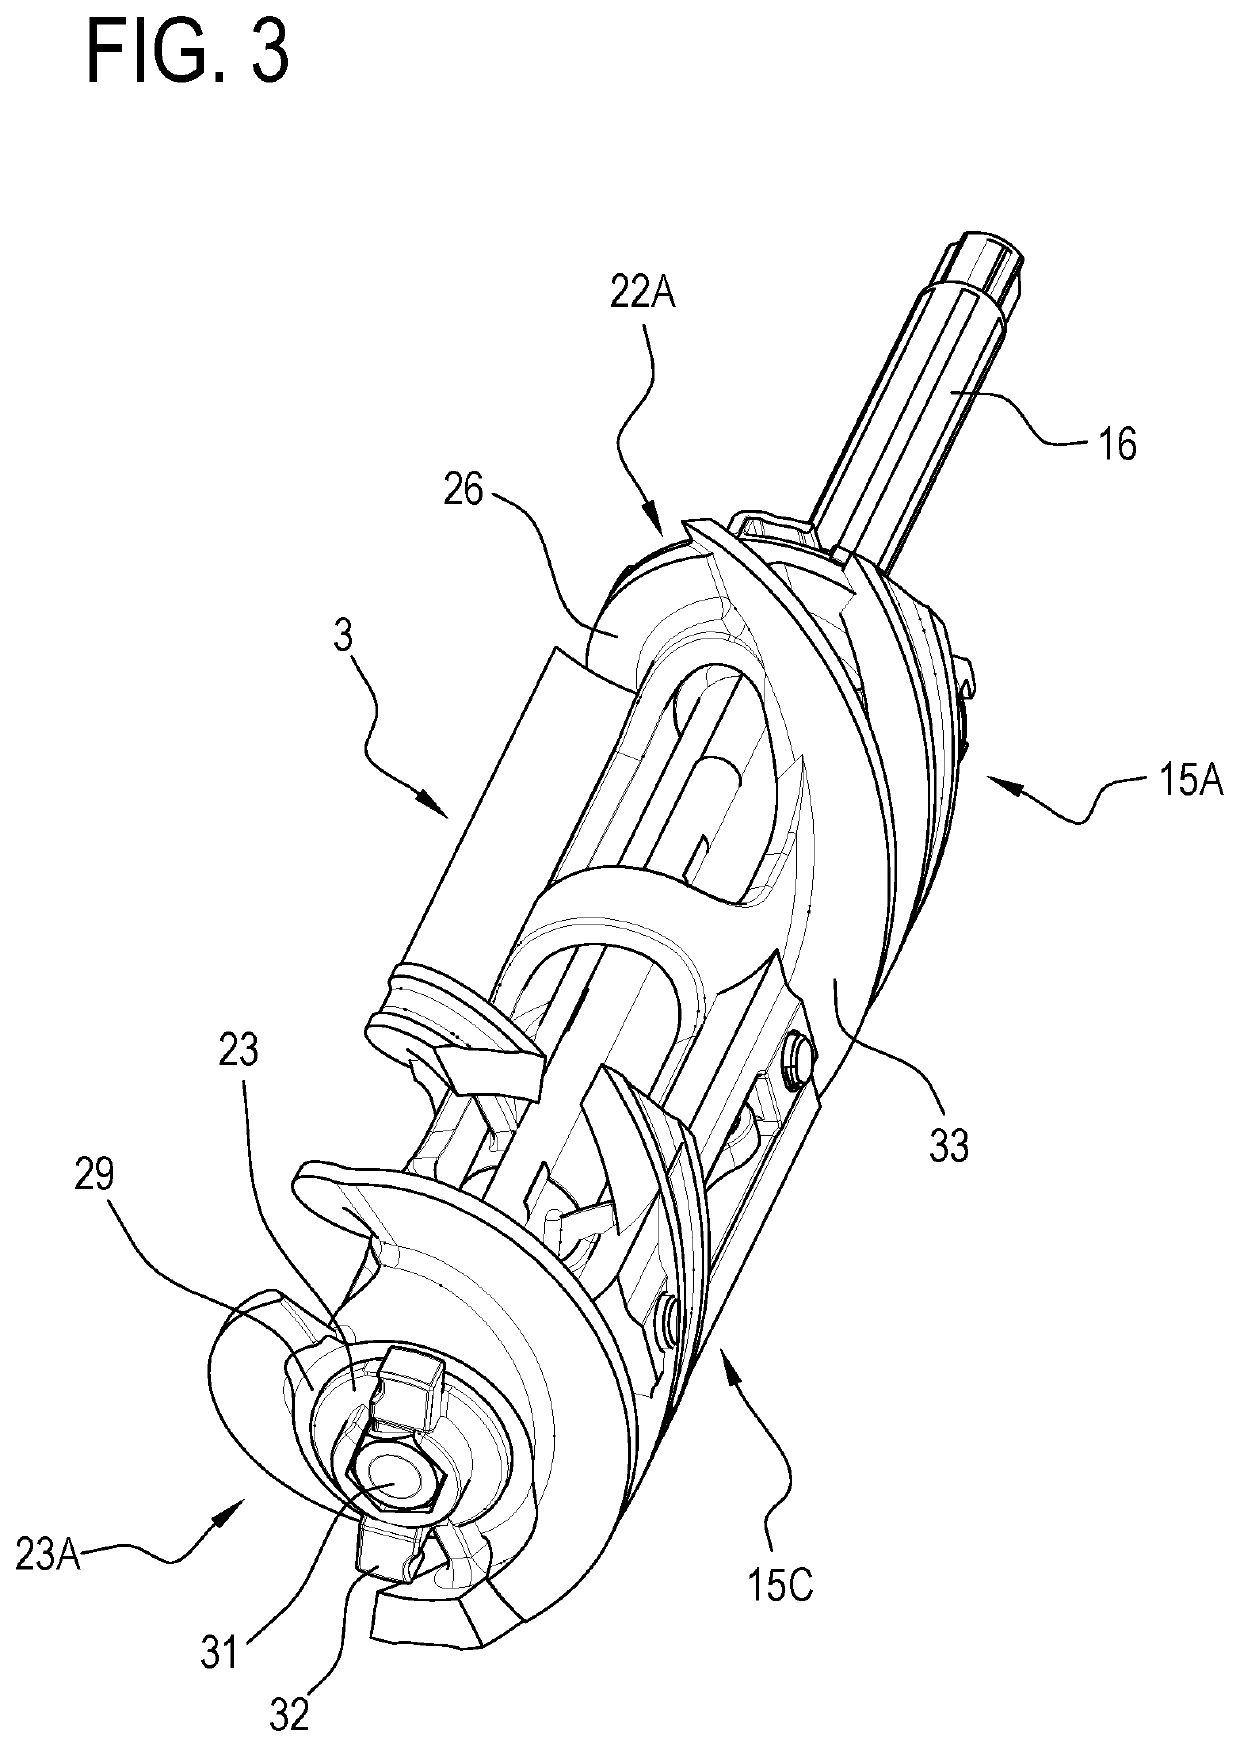 Stirring device of a machine for making liquid or semi-liquid food products